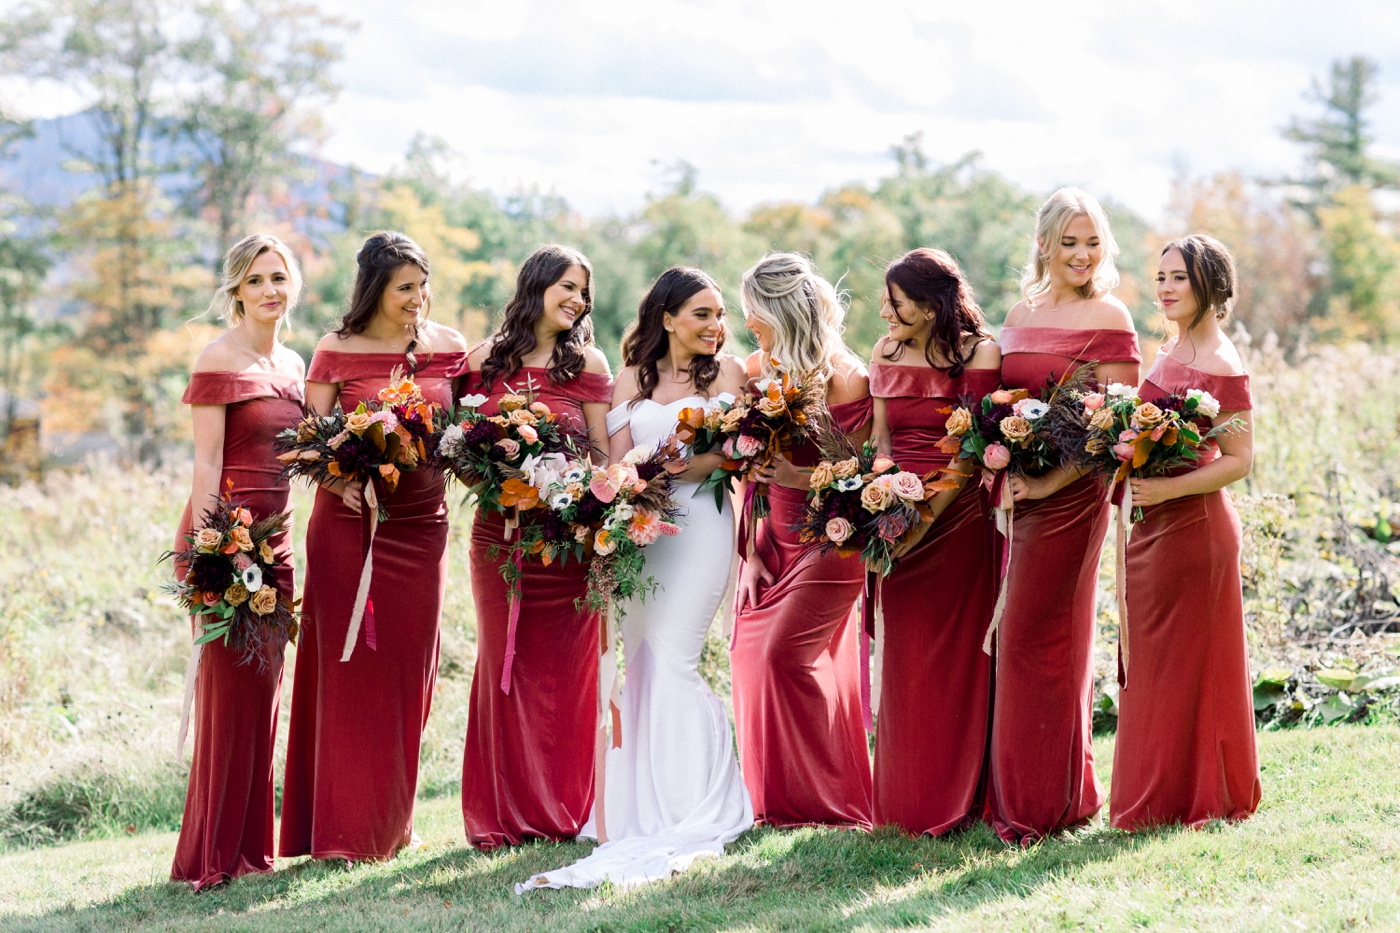 Bridesmaids in velvet rust colored gowns